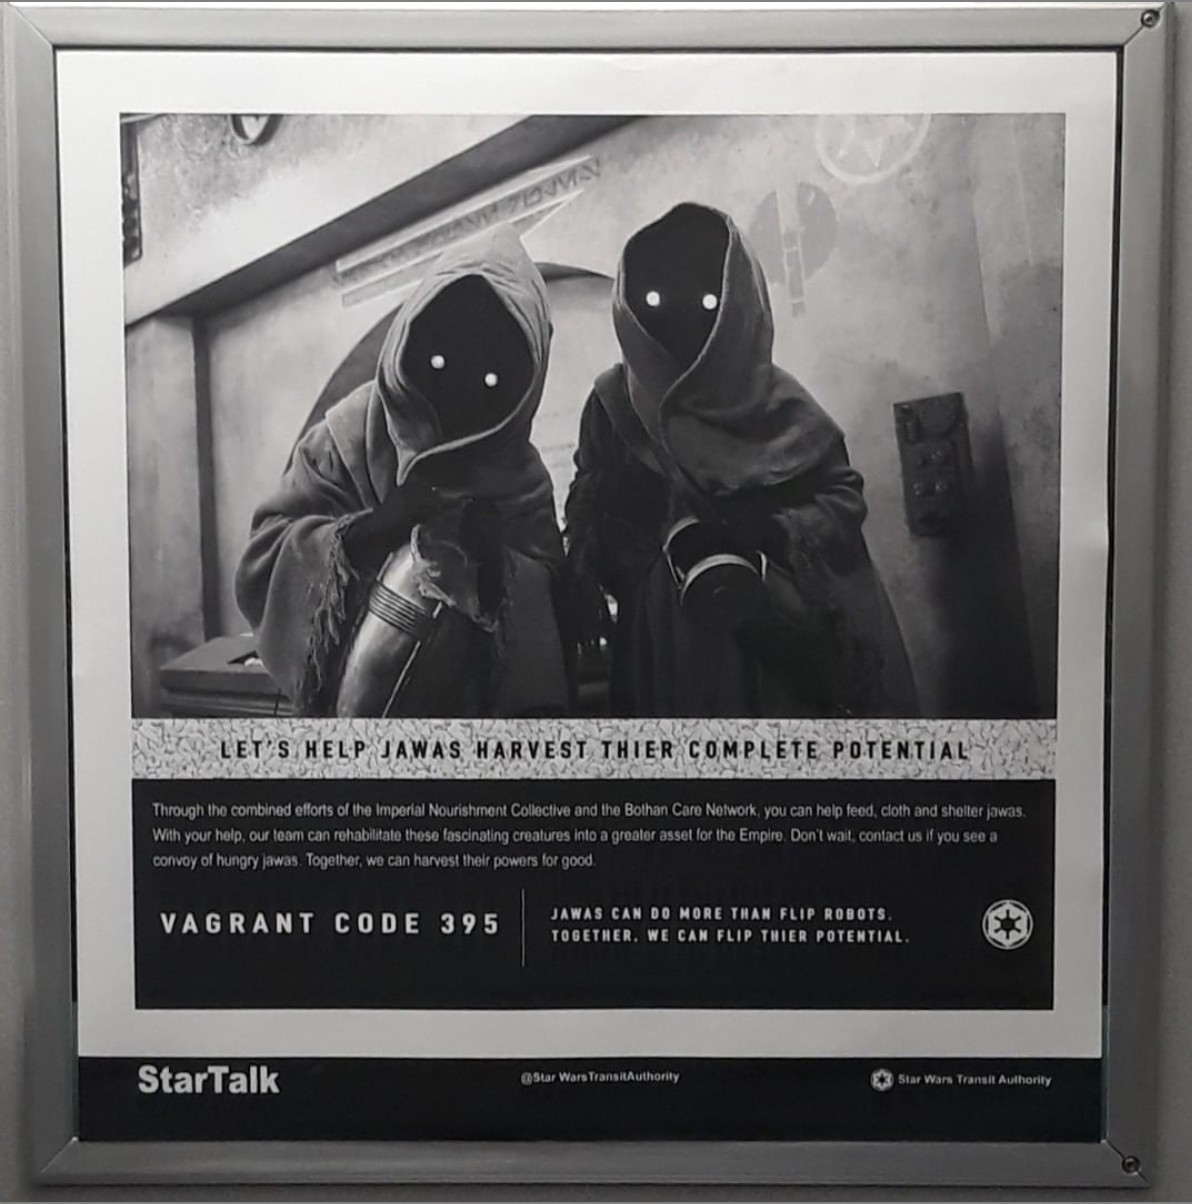 poster inside of an MTA subway cart of two creatures wearing capes from the Star Wars films